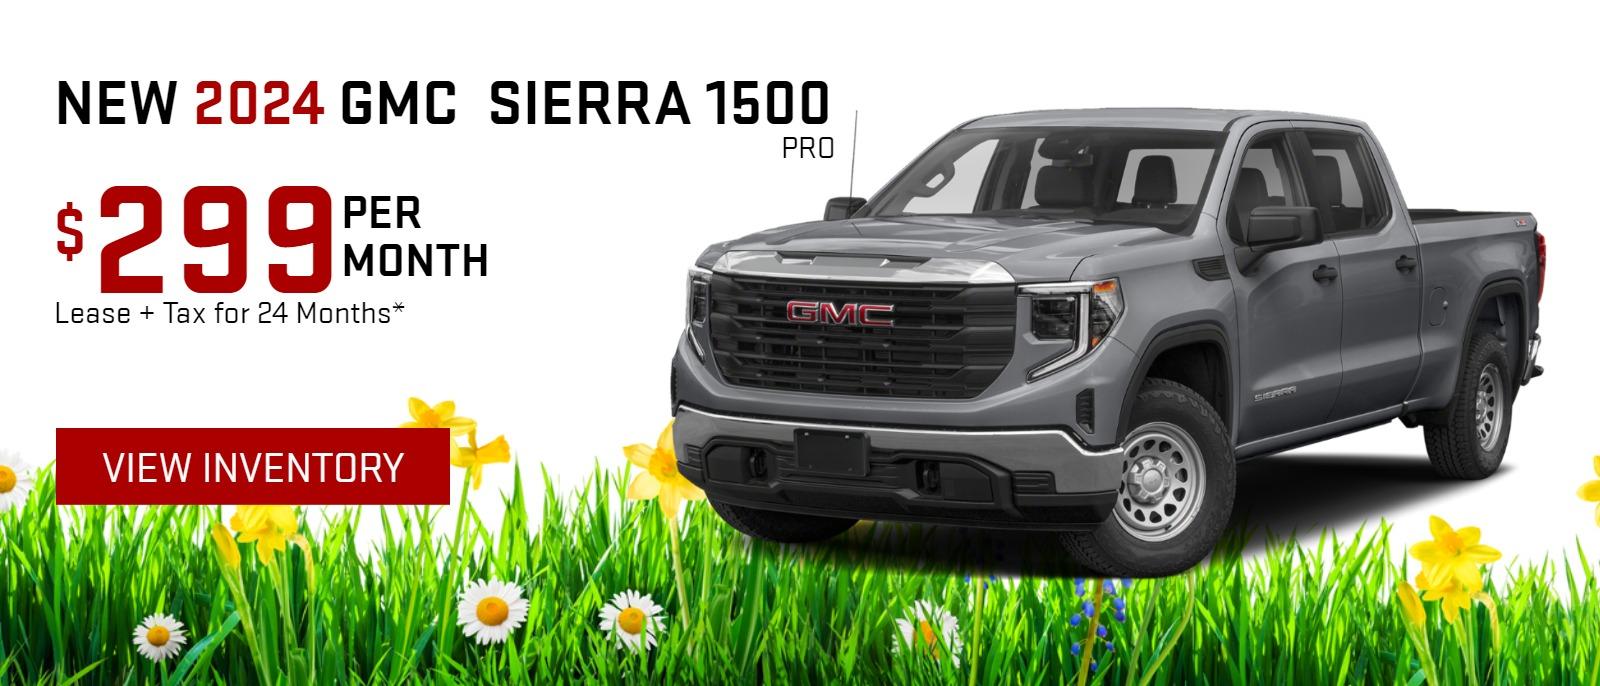 New 2024 GMC Sierra 1500 Pro
$299/mo. Lease + Tax for 24 Months*